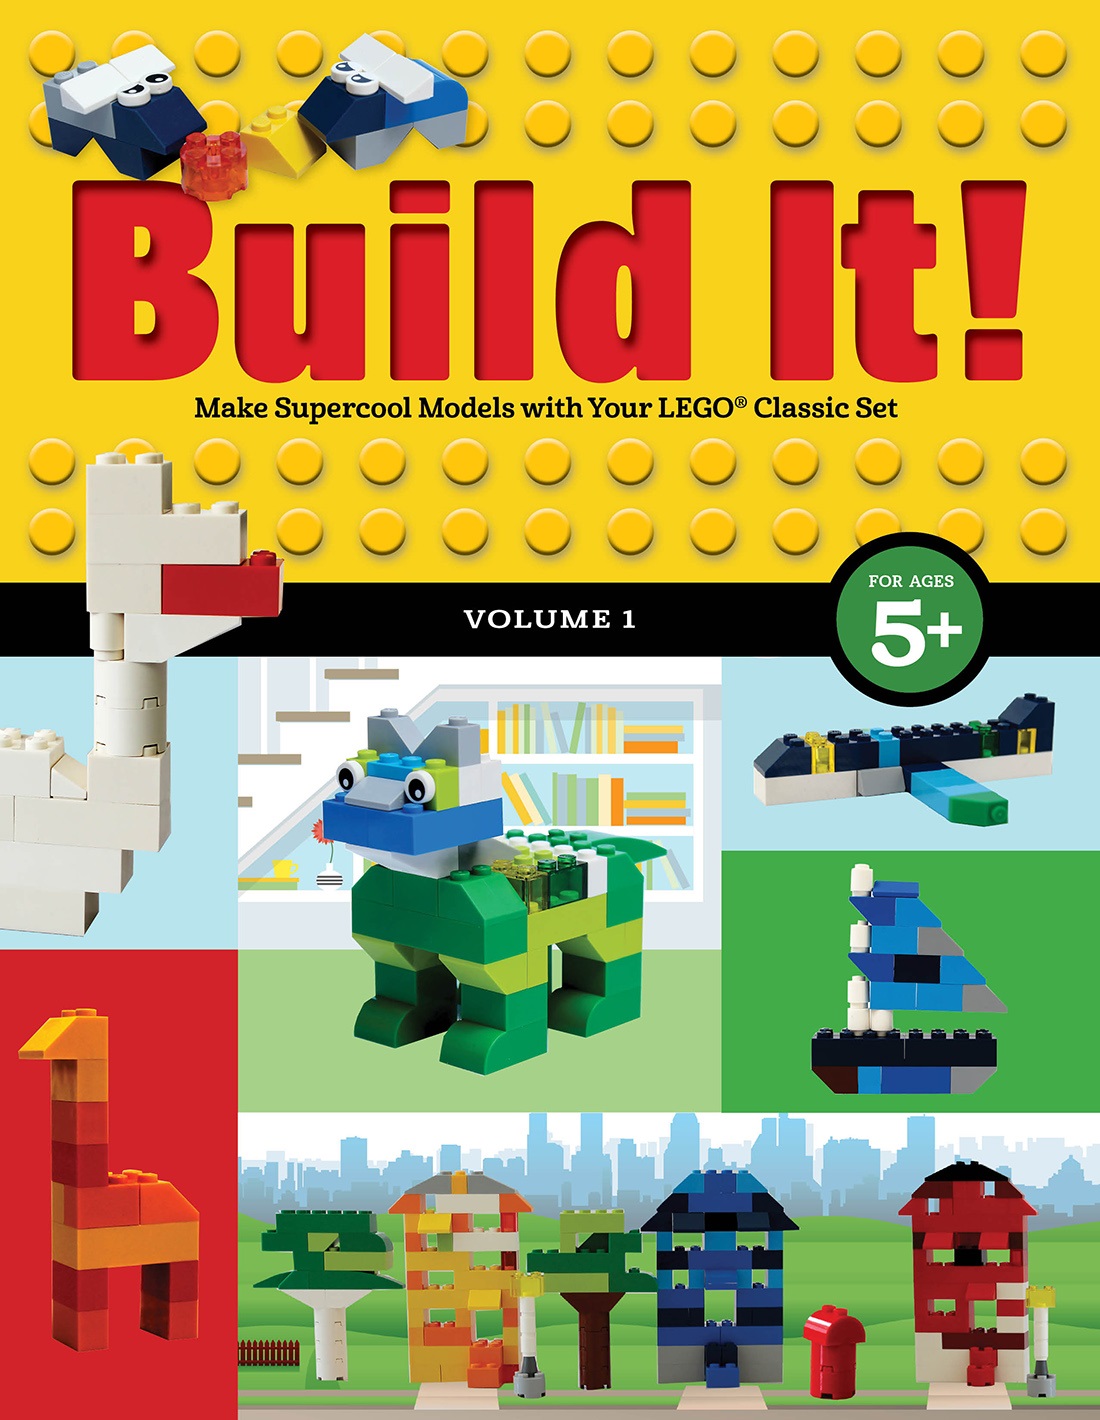 Build It! Volume 1: Make Supercool Models with Your Lego Classic Set